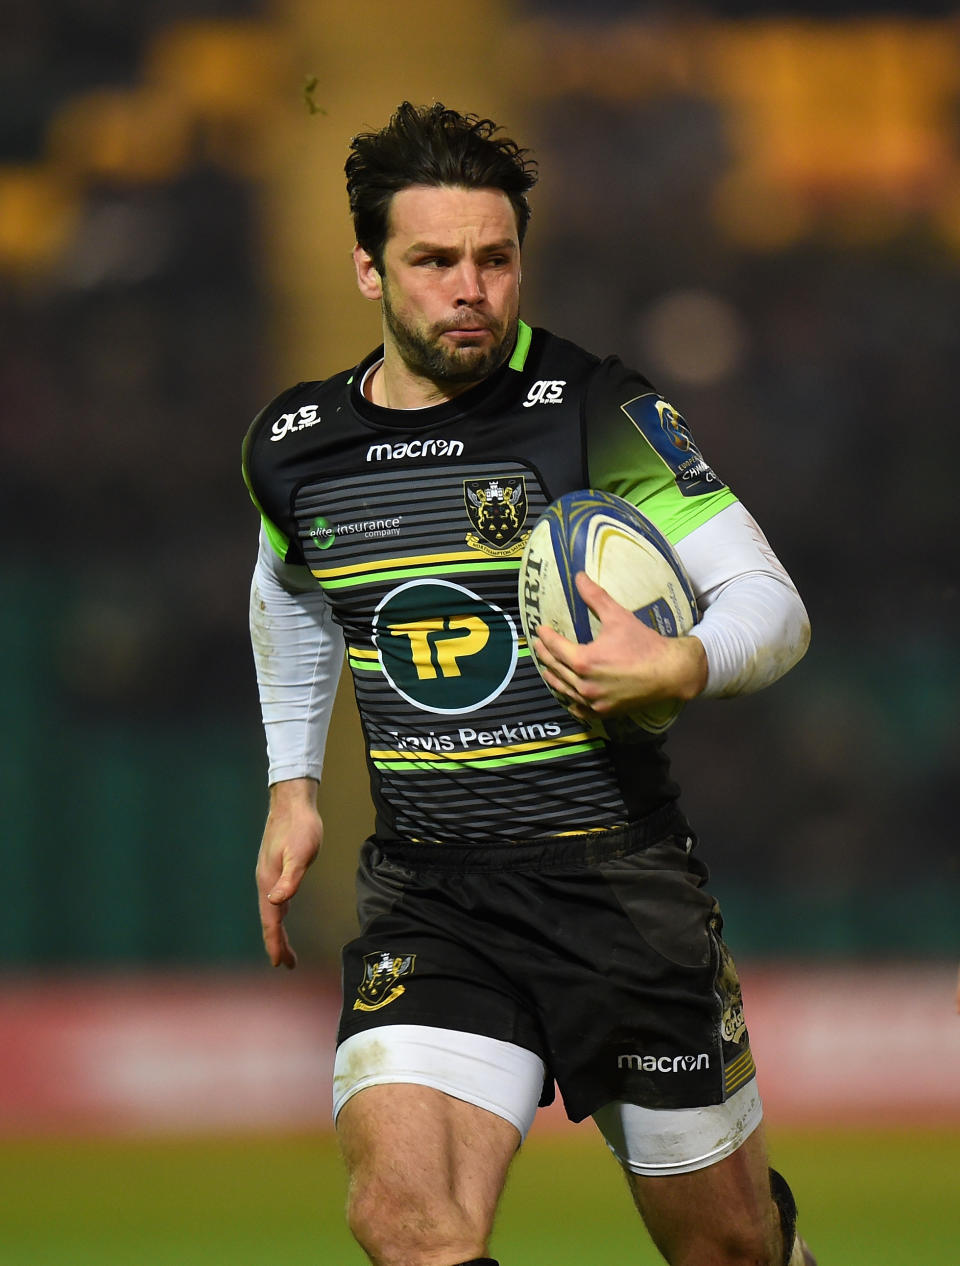 NORTHAMPTON, ENGLAND - JANUARY 13:  Ben Foden of Northampton Saints during the European Rugby Champions Cup match between Northampton Saints and ASM Clermont Auvergne at Franklin's Gardens on January 13, 2018 in Northampton, England.  (Photo by Tony Marshall/Getty Images)